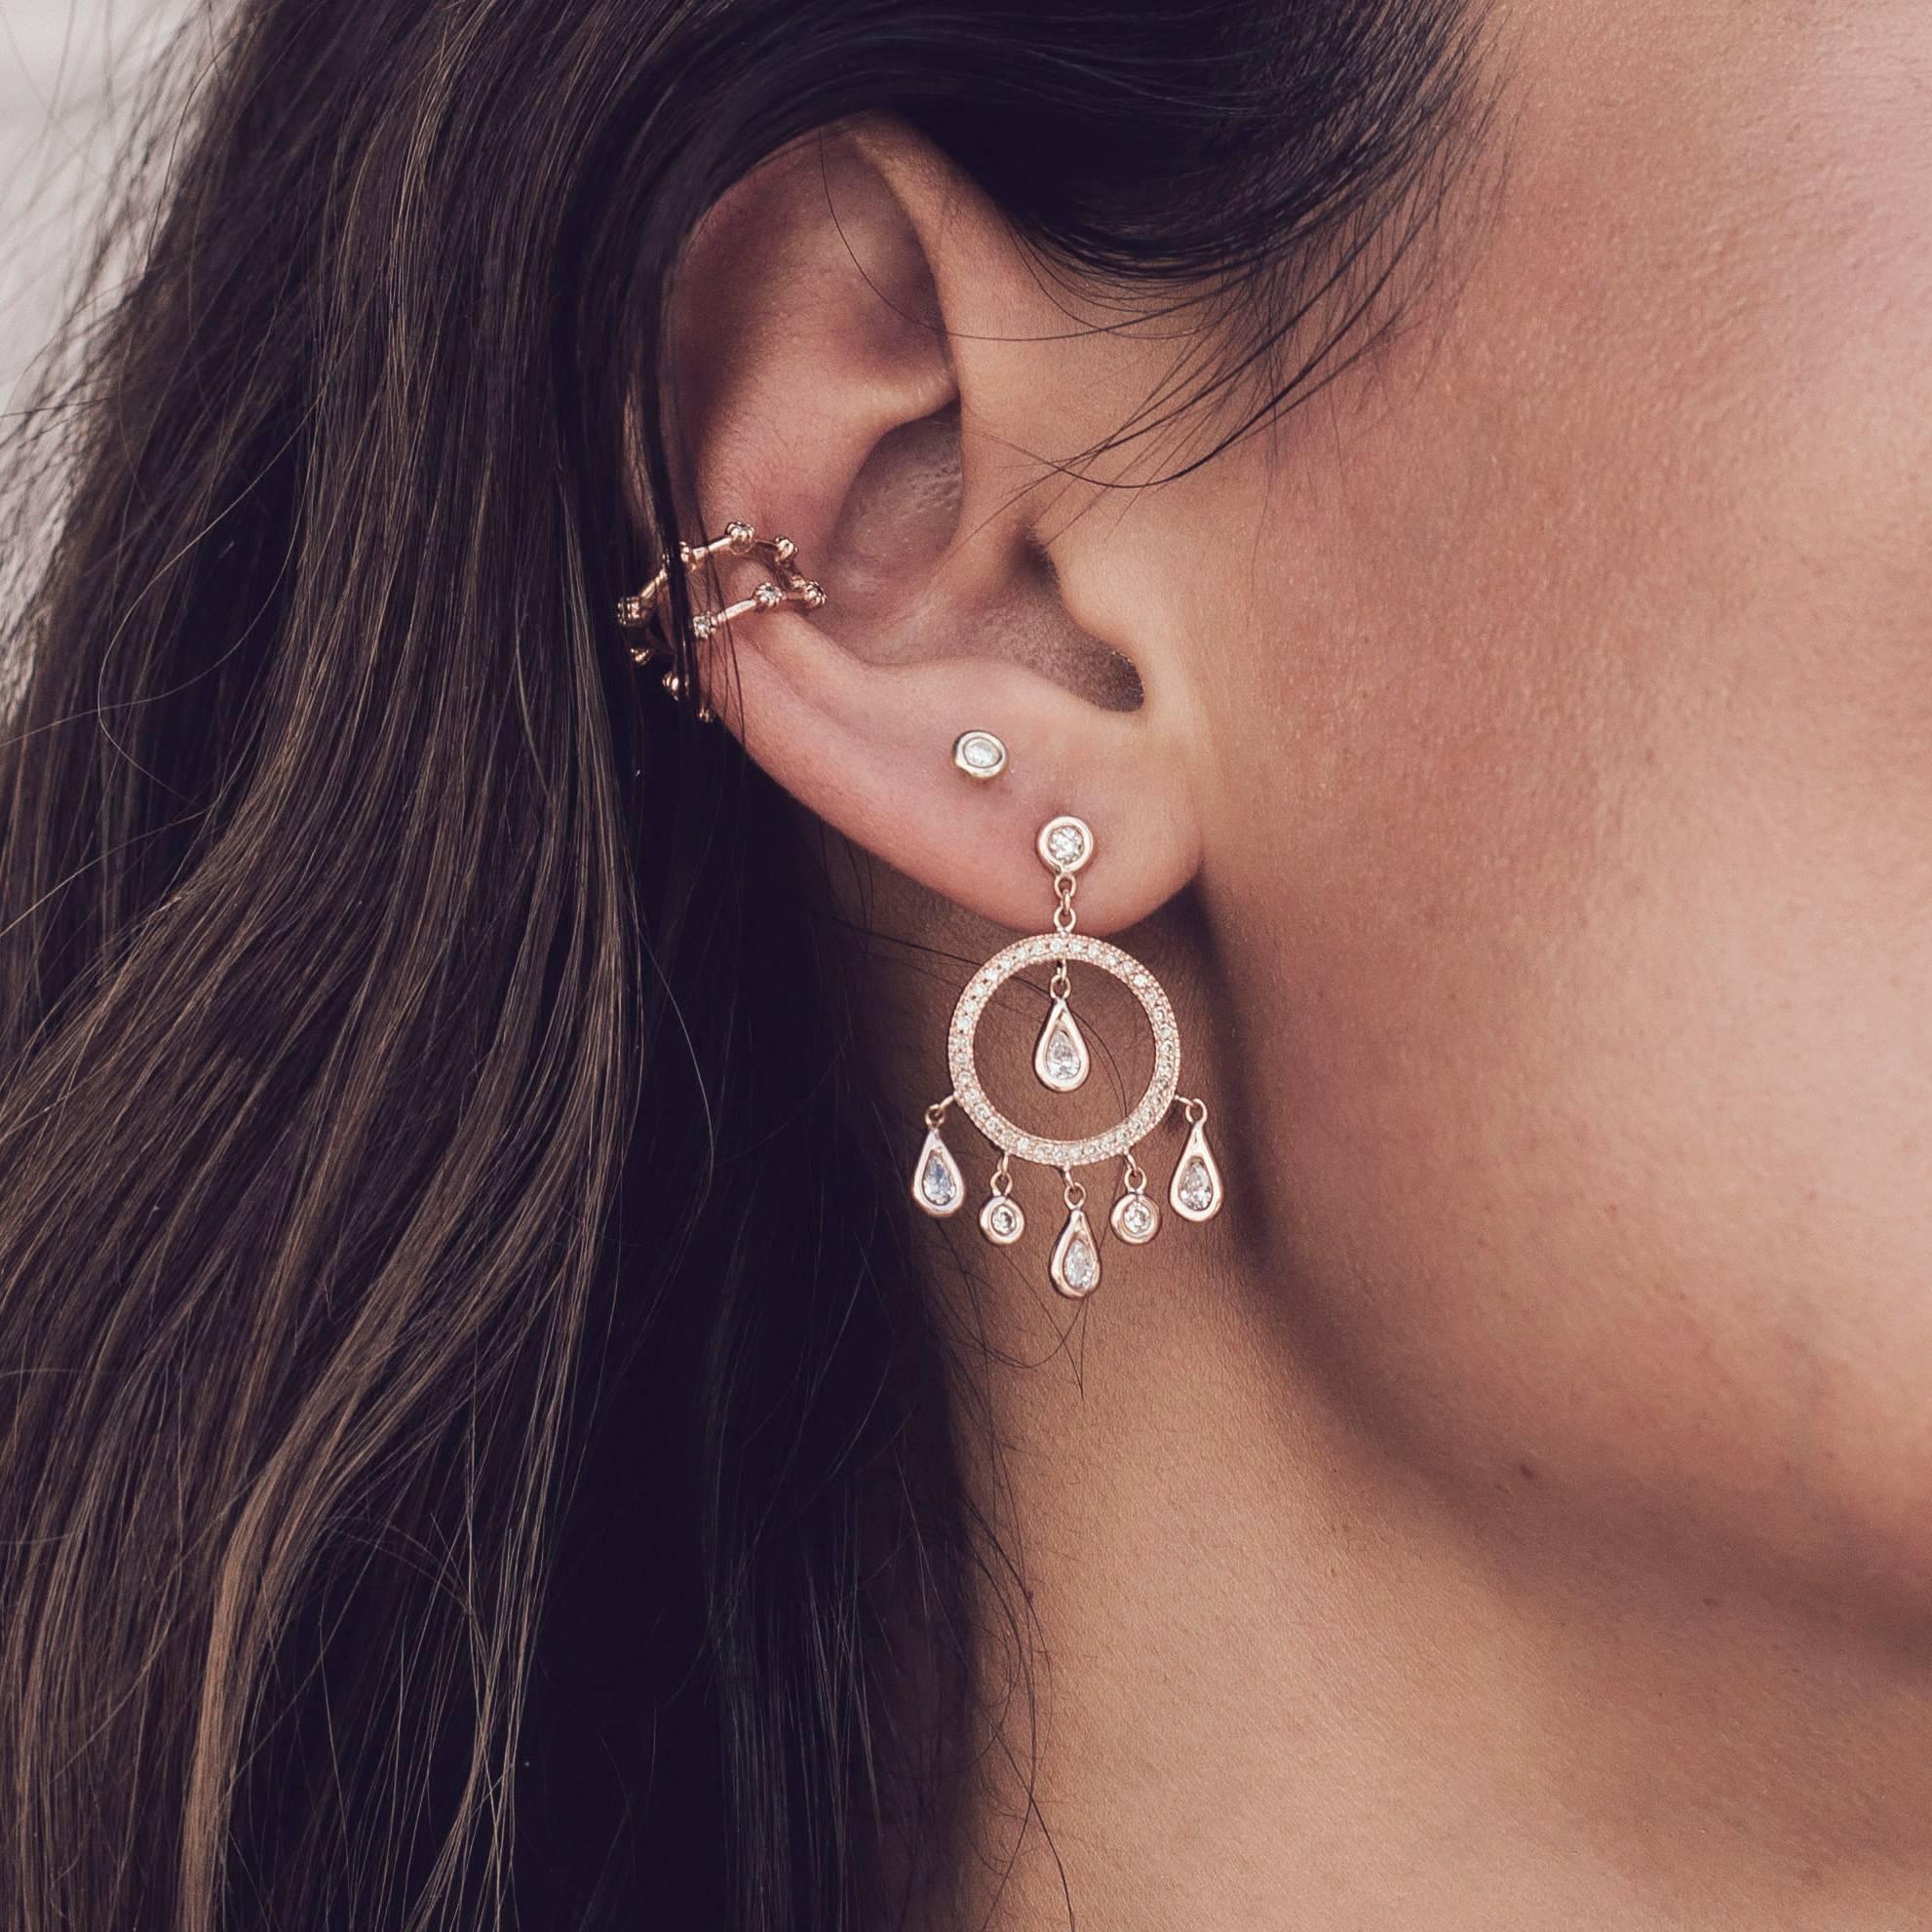 Pave diamond Dreamcatcher earrings. Available in 14k Rose, Yellow or White gold. 